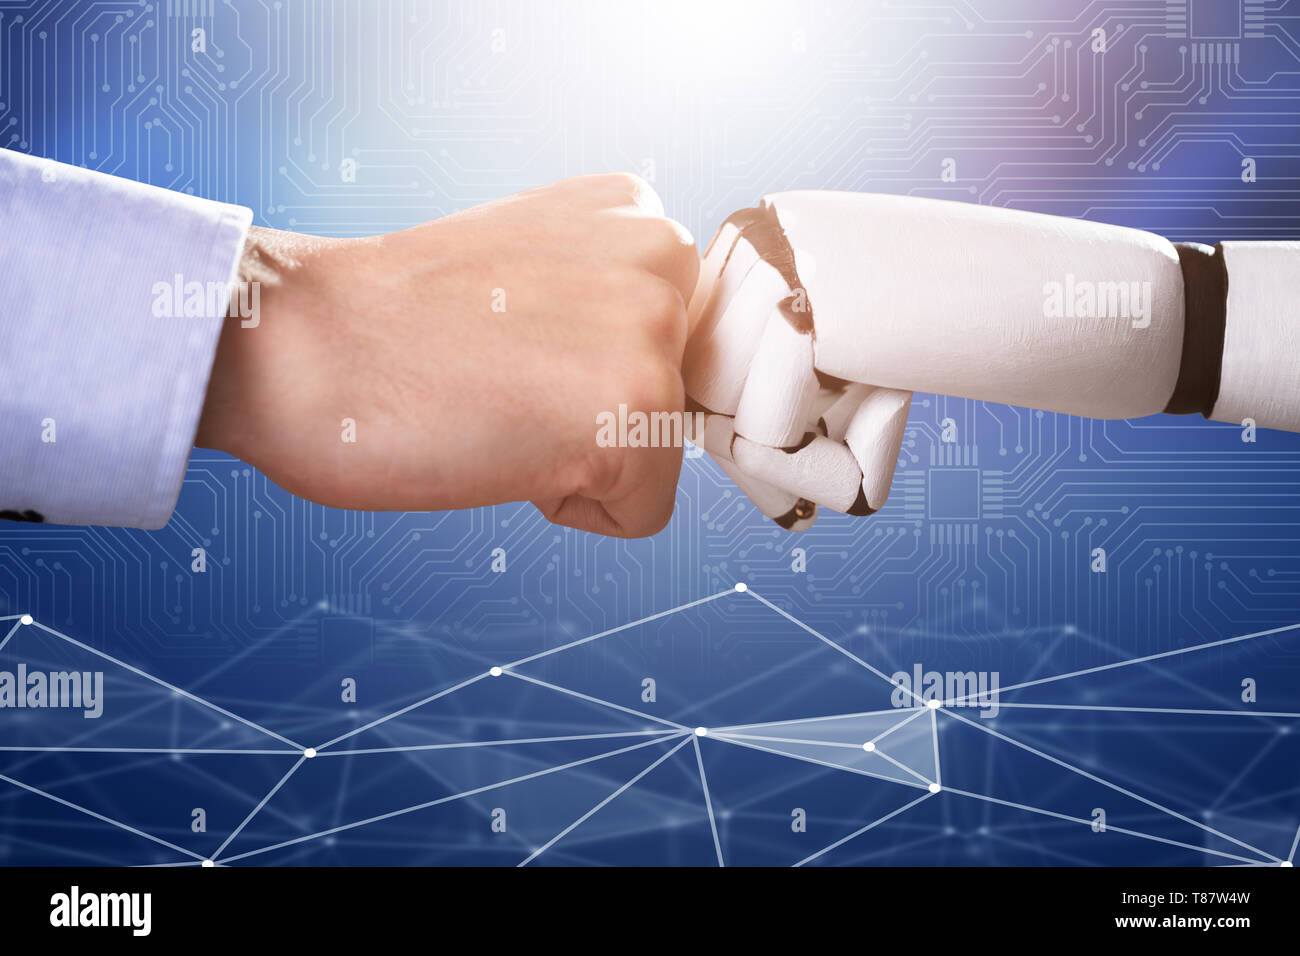 Robot And Human Hand Making Fist Bump On Blue Digital Backdrop Stock Photo